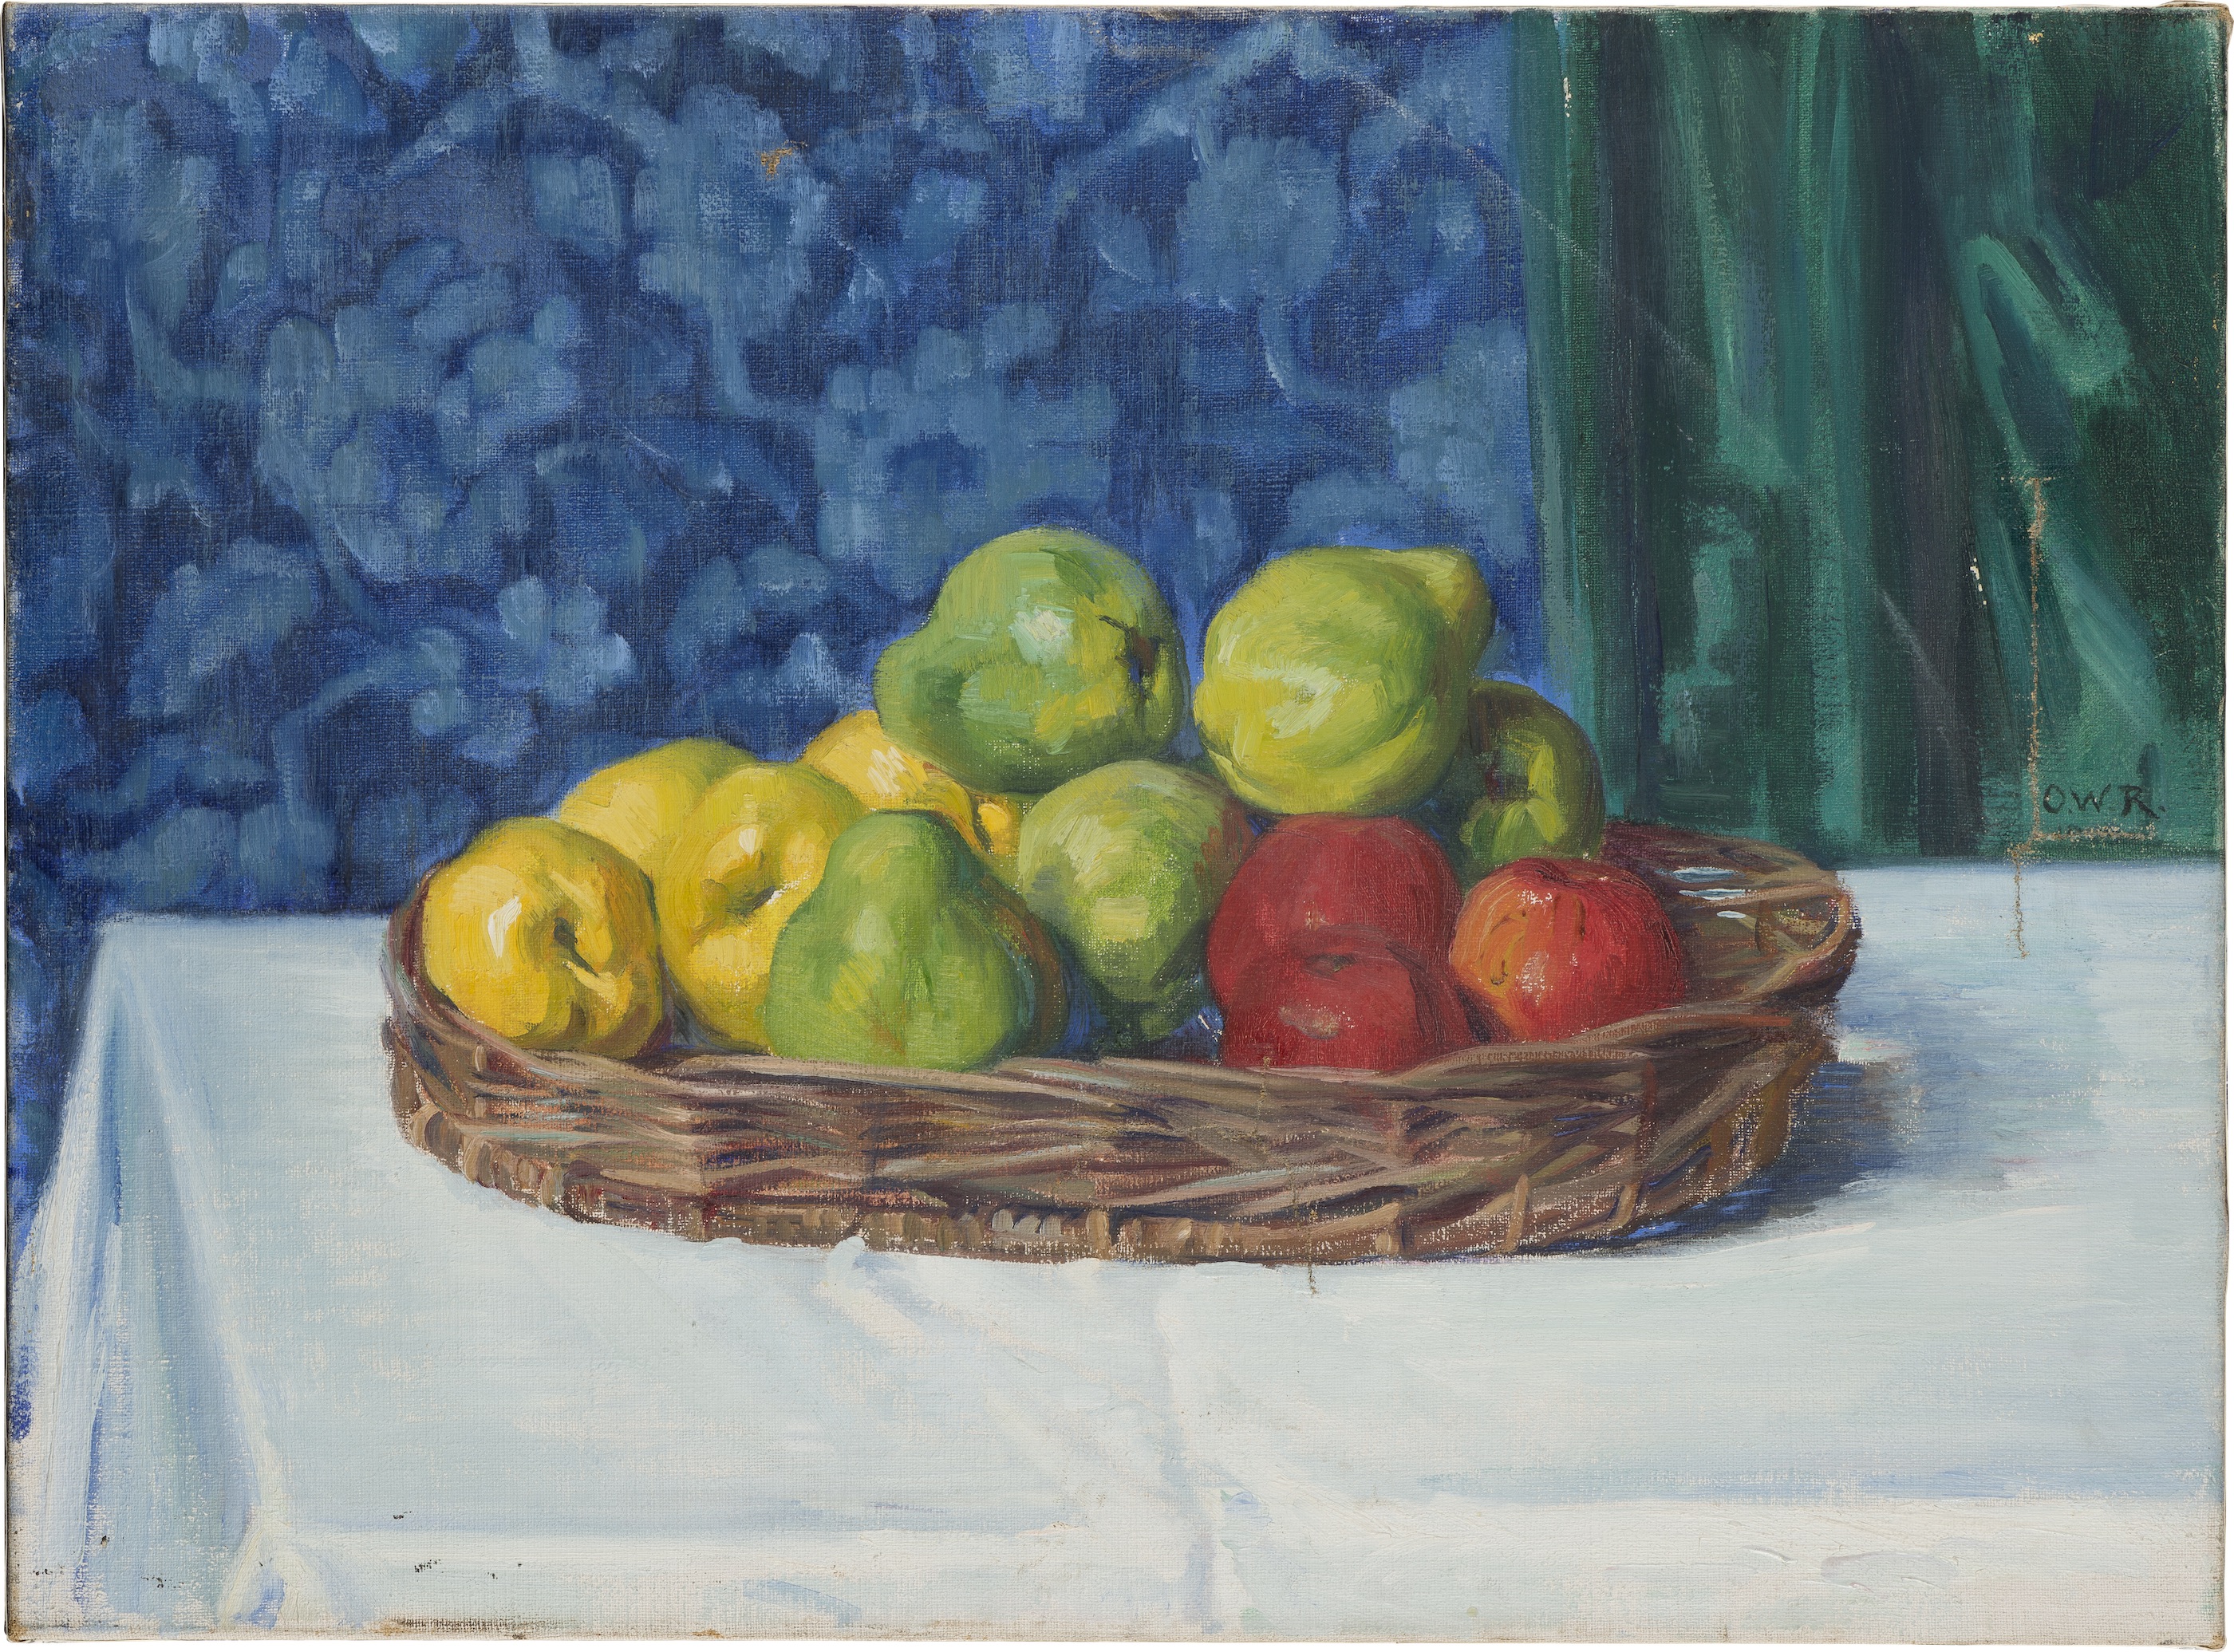 Still Life: Basket with Fruit on a Table by Ottilie W. Roederstein - 1909 - 58.6 x 79 cm Städel Museum